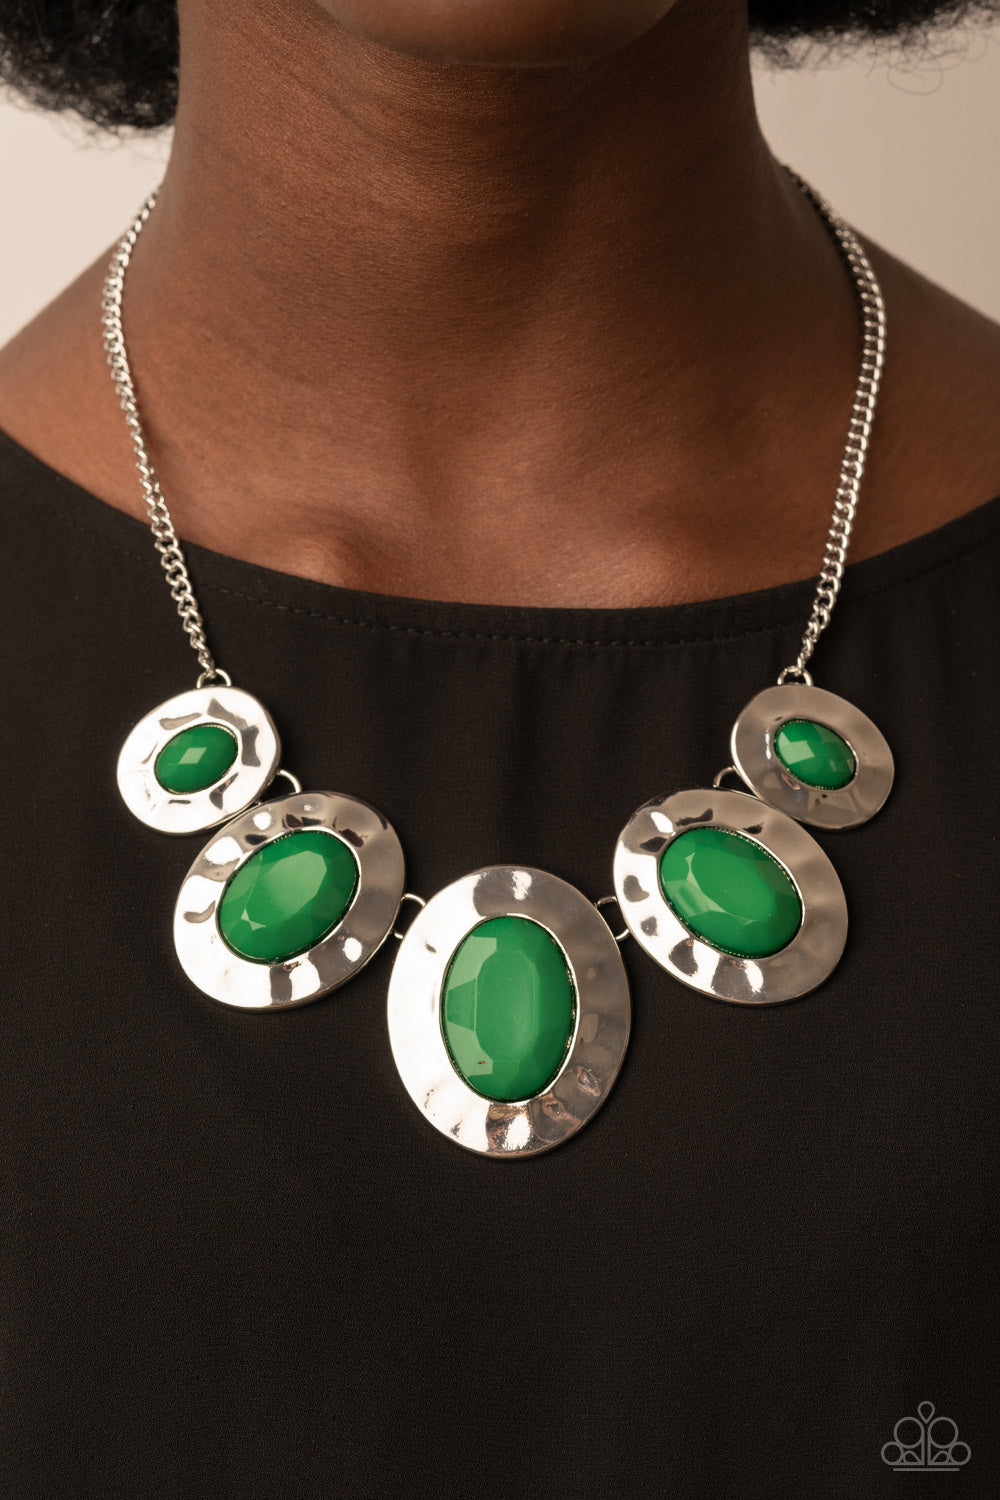 Paparazzi Accessories - Rivera Rendezvous - Green Necklaces gradually increasing in size, hammered silver oval frames are dotted with opalescent Leprechaun beads as they delicately link below the collar for a refreshing pop of color. Features an adjustable clasp closure.  Sold as one individual necklace. Includes one pair of matching earrings.